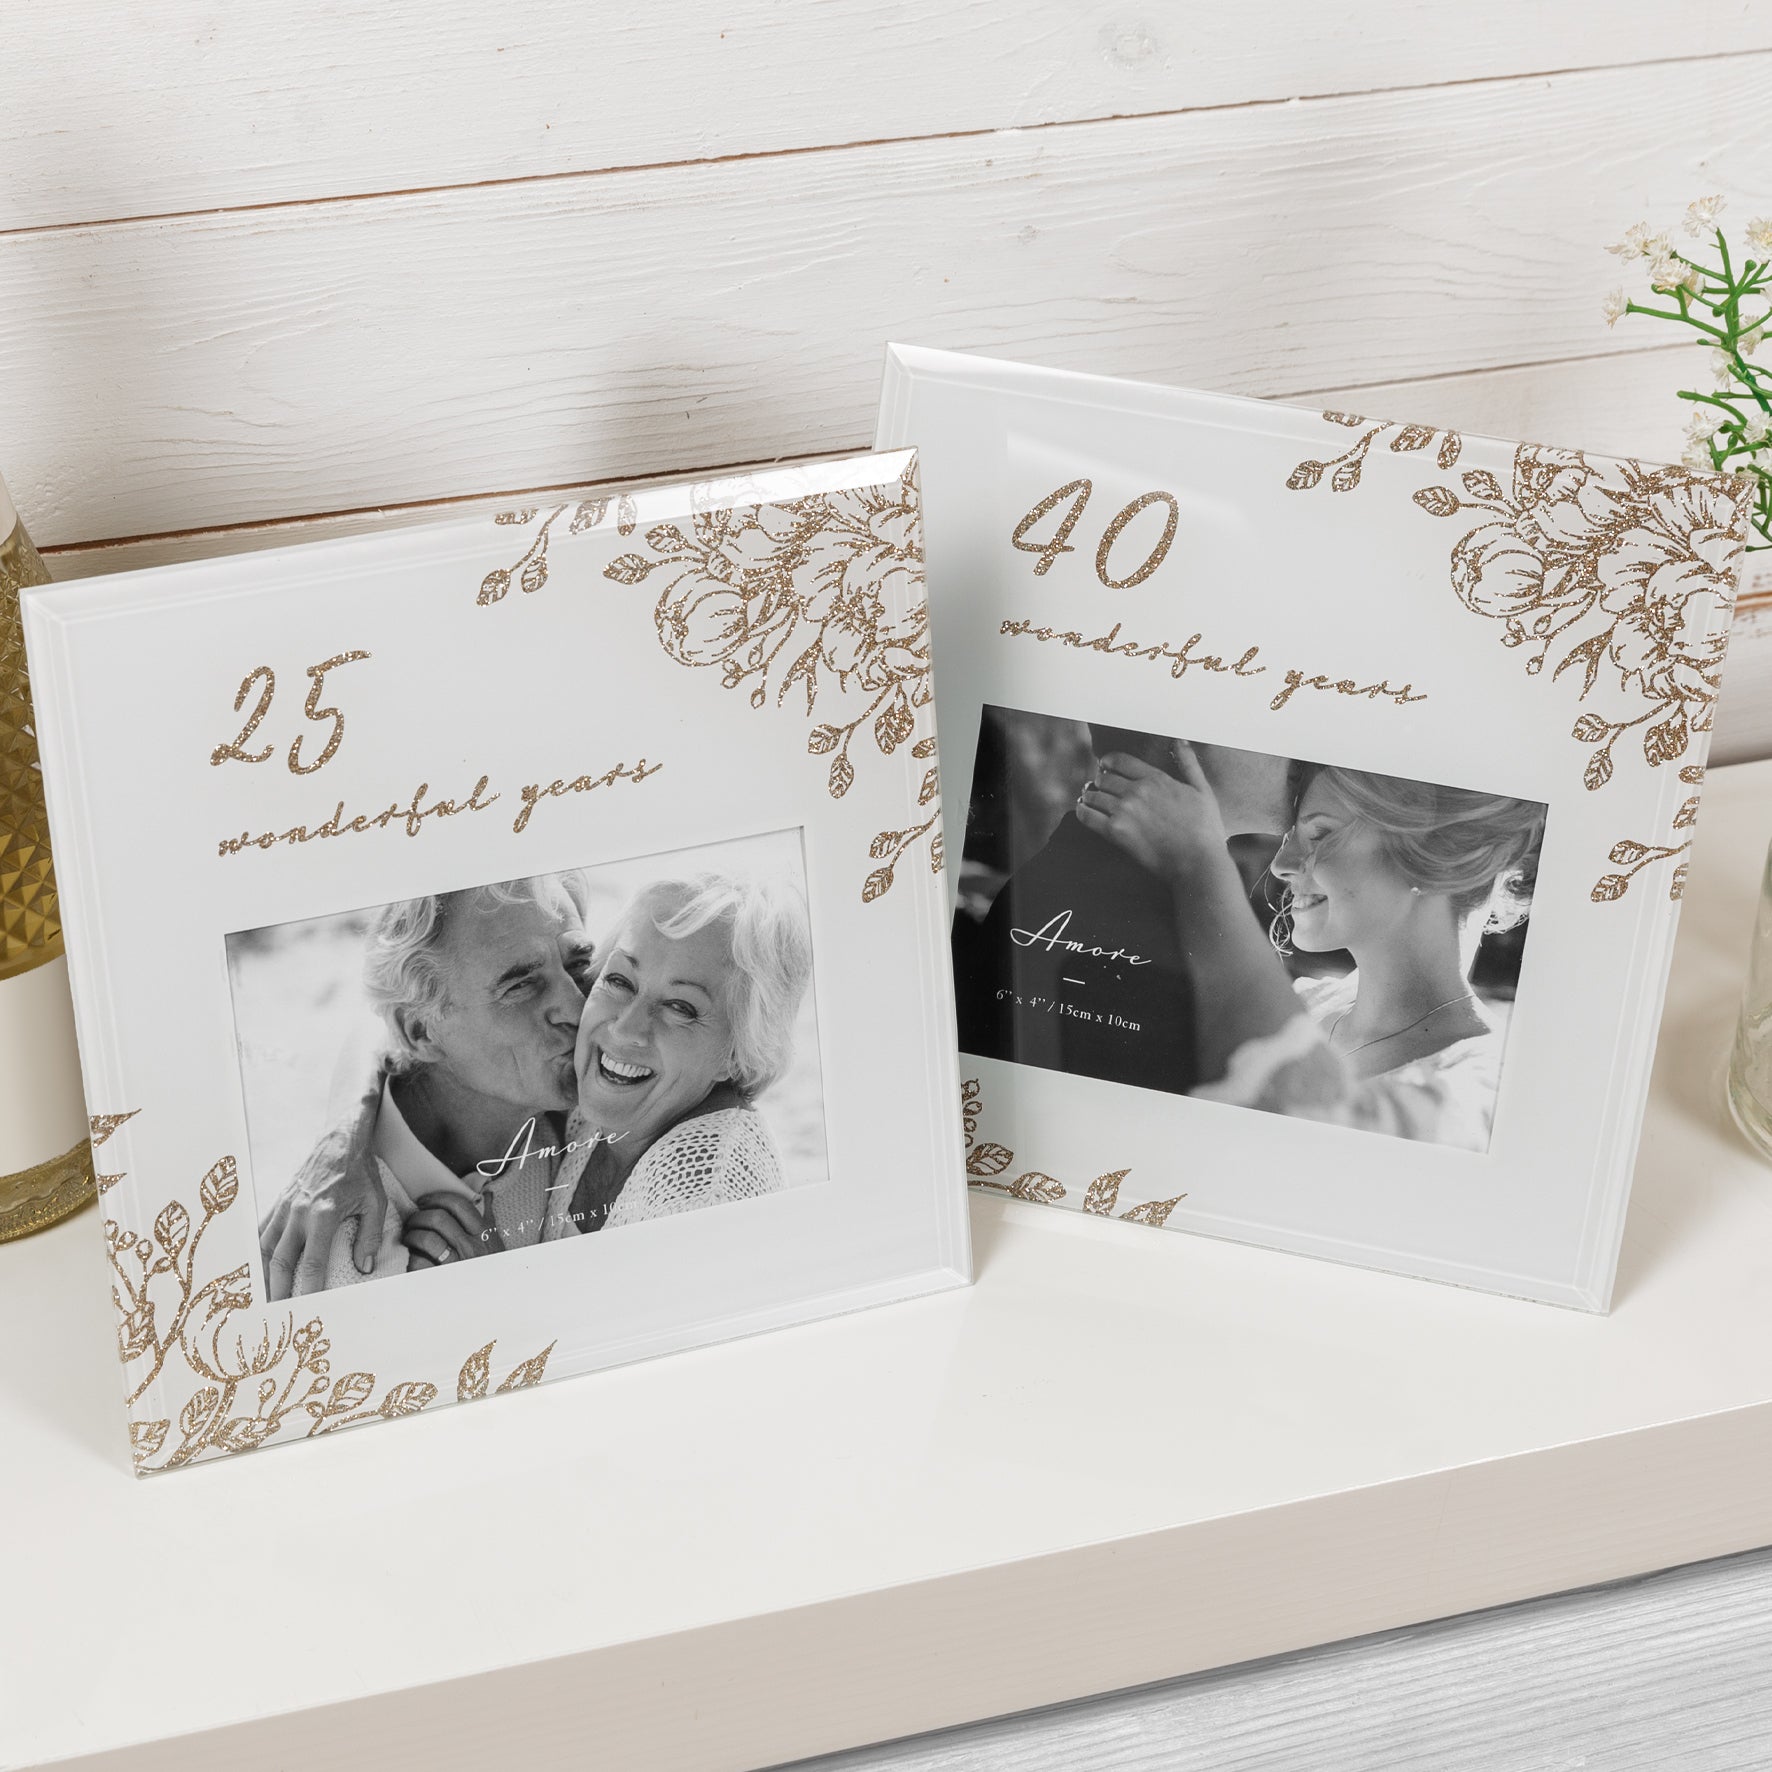 40th Anniversary Photo Frame - 6" x 4" Aperture - Pale Grey Glass Gold Floral